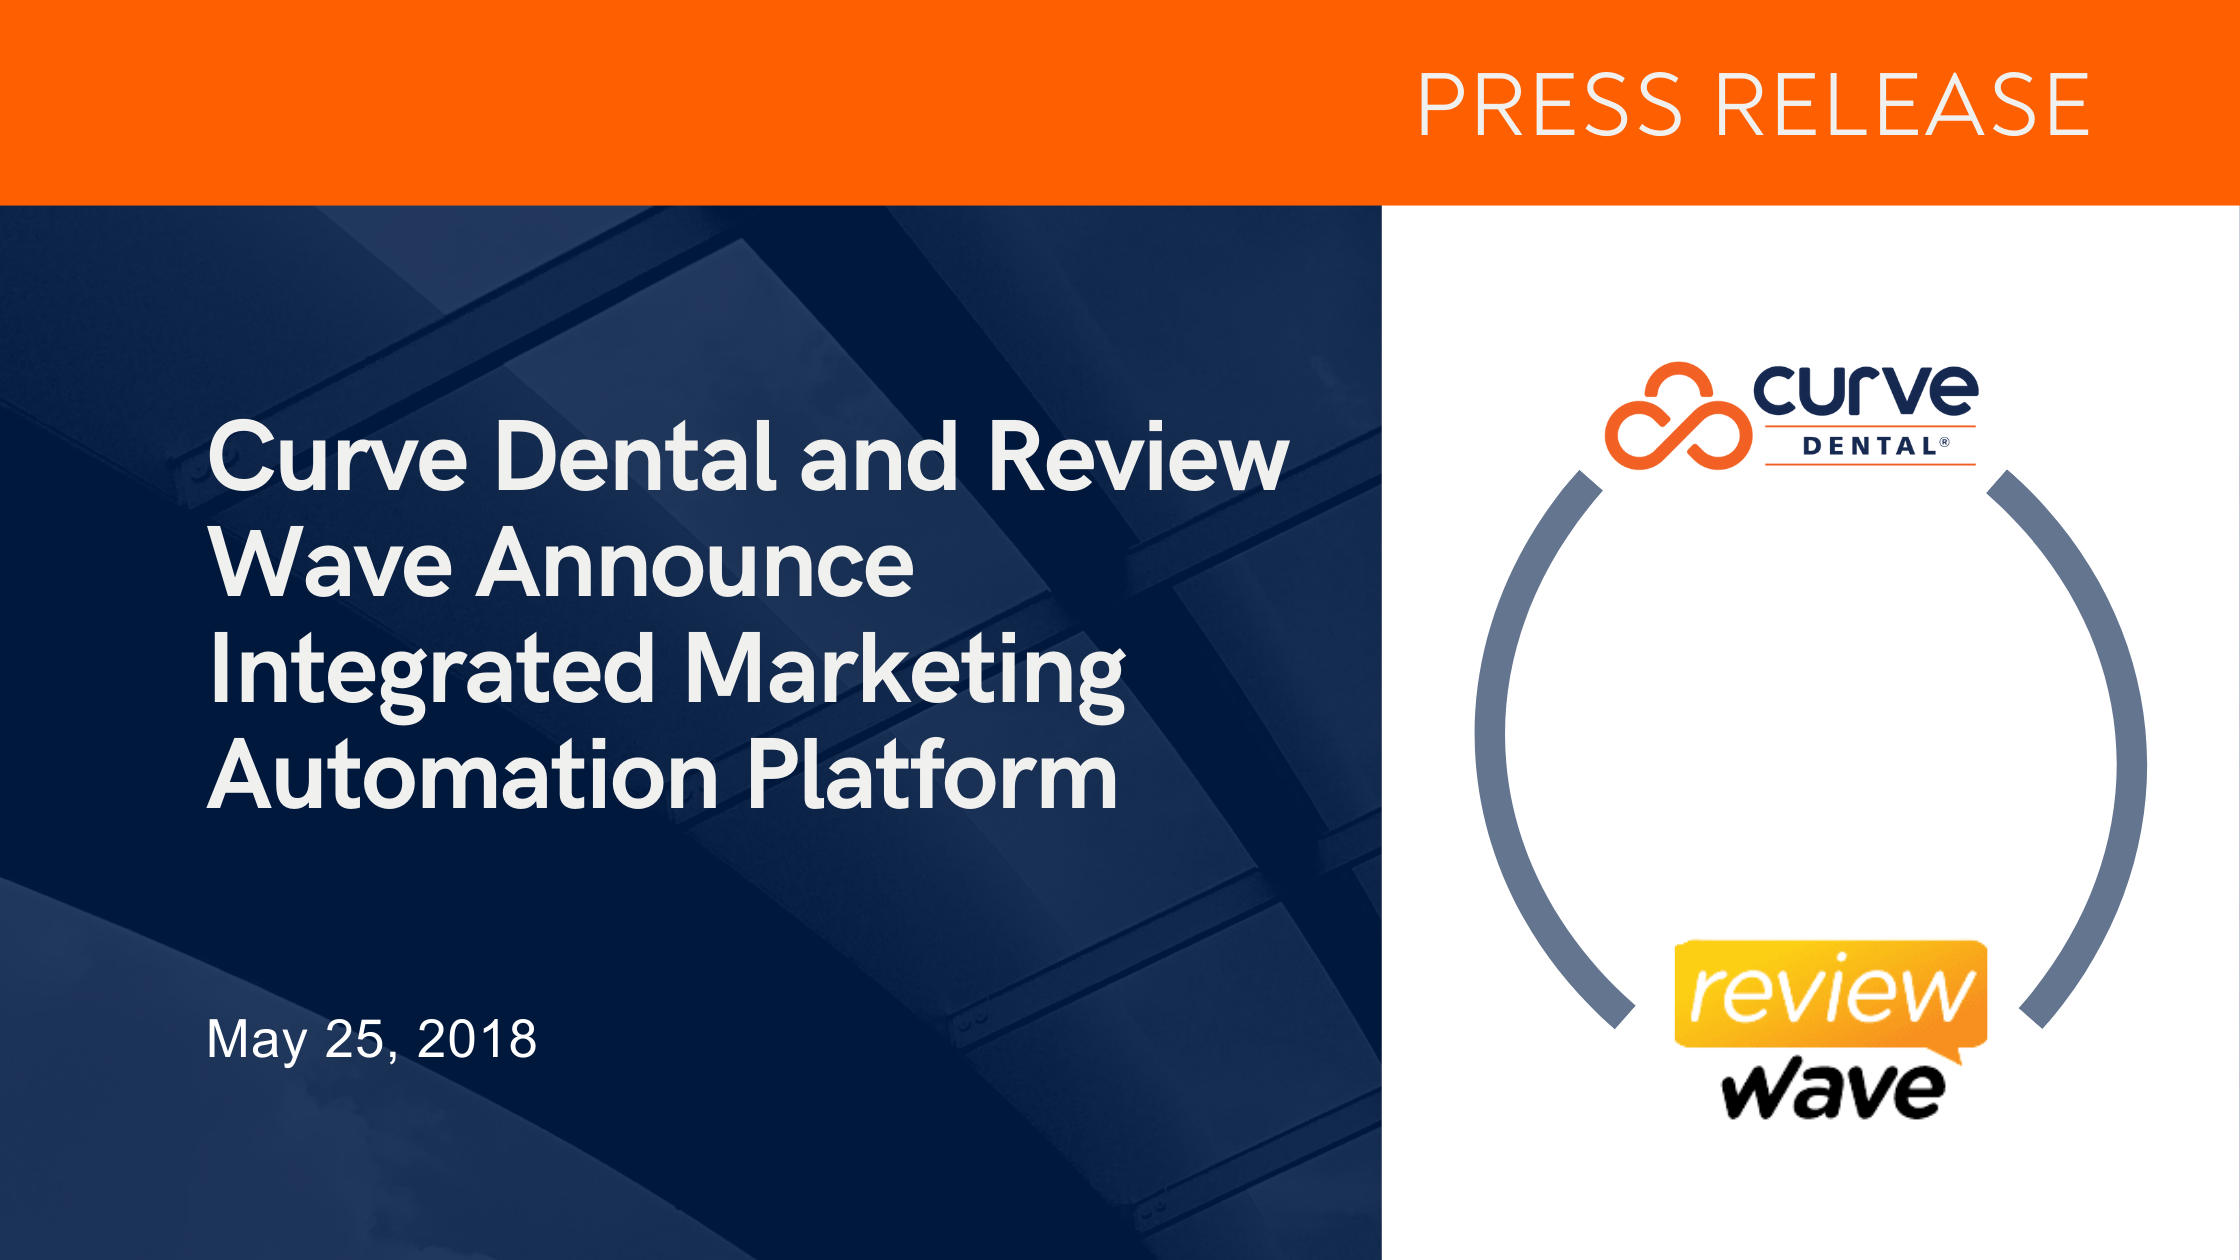 Curve Dental and Review Wave Announce Integrated Marketing Automation Platform